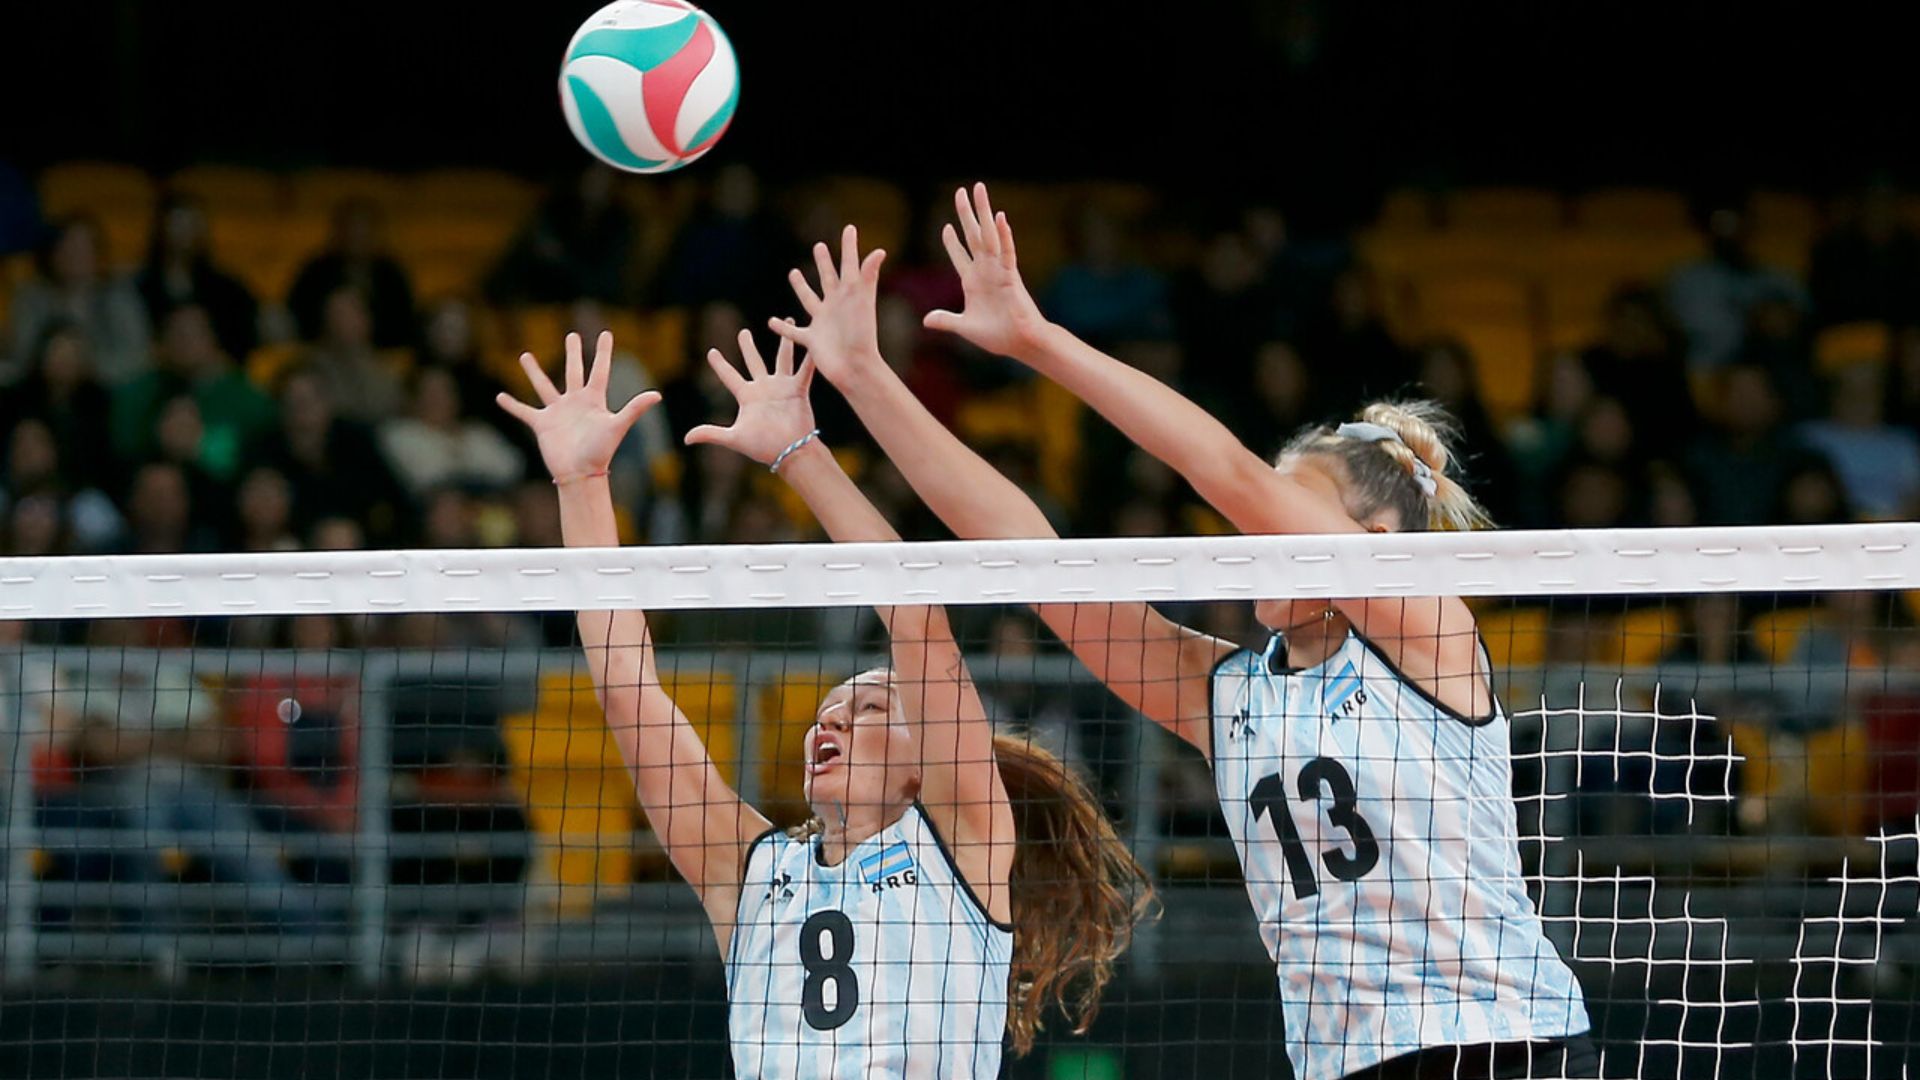 Argentina as 'home' team, gets to semifinals in female's volleyball